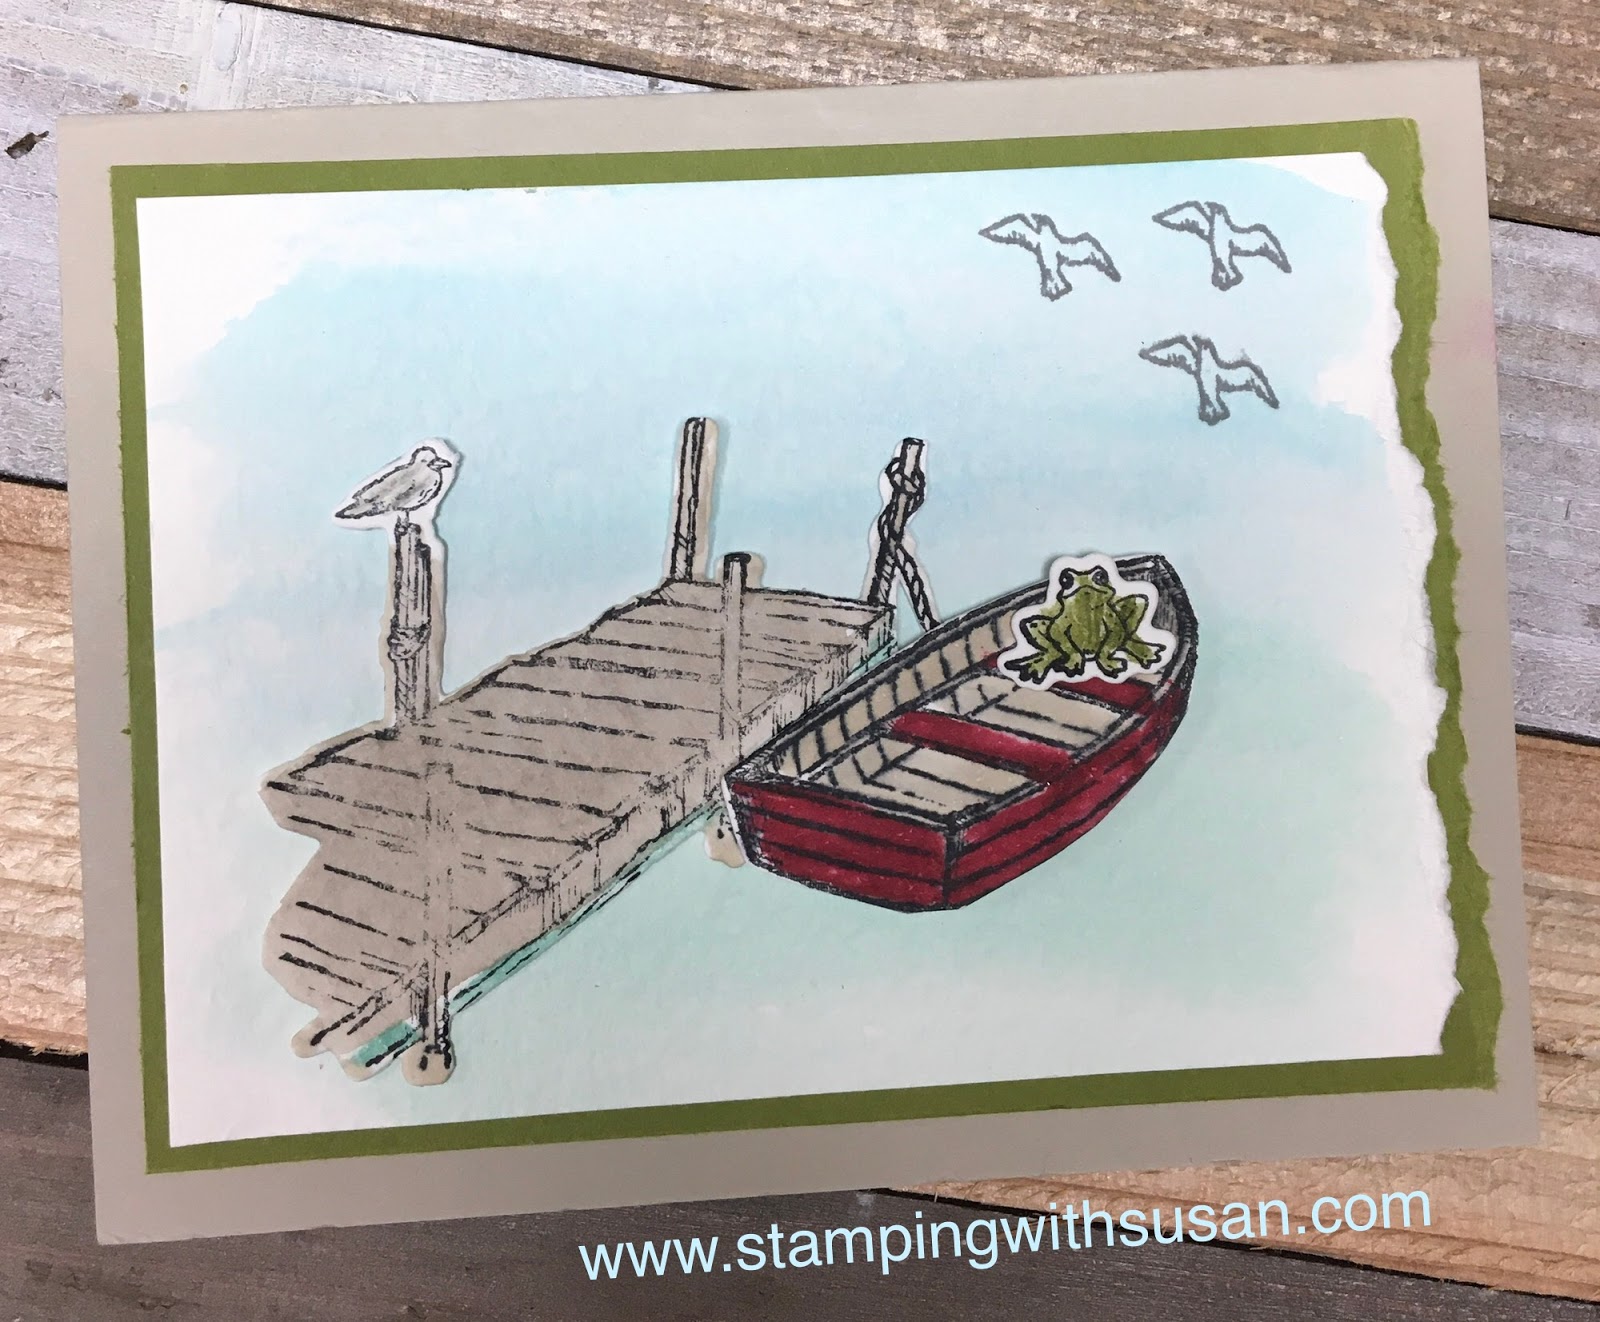 Stamping With Susan: Stampin' Up! By The Dock